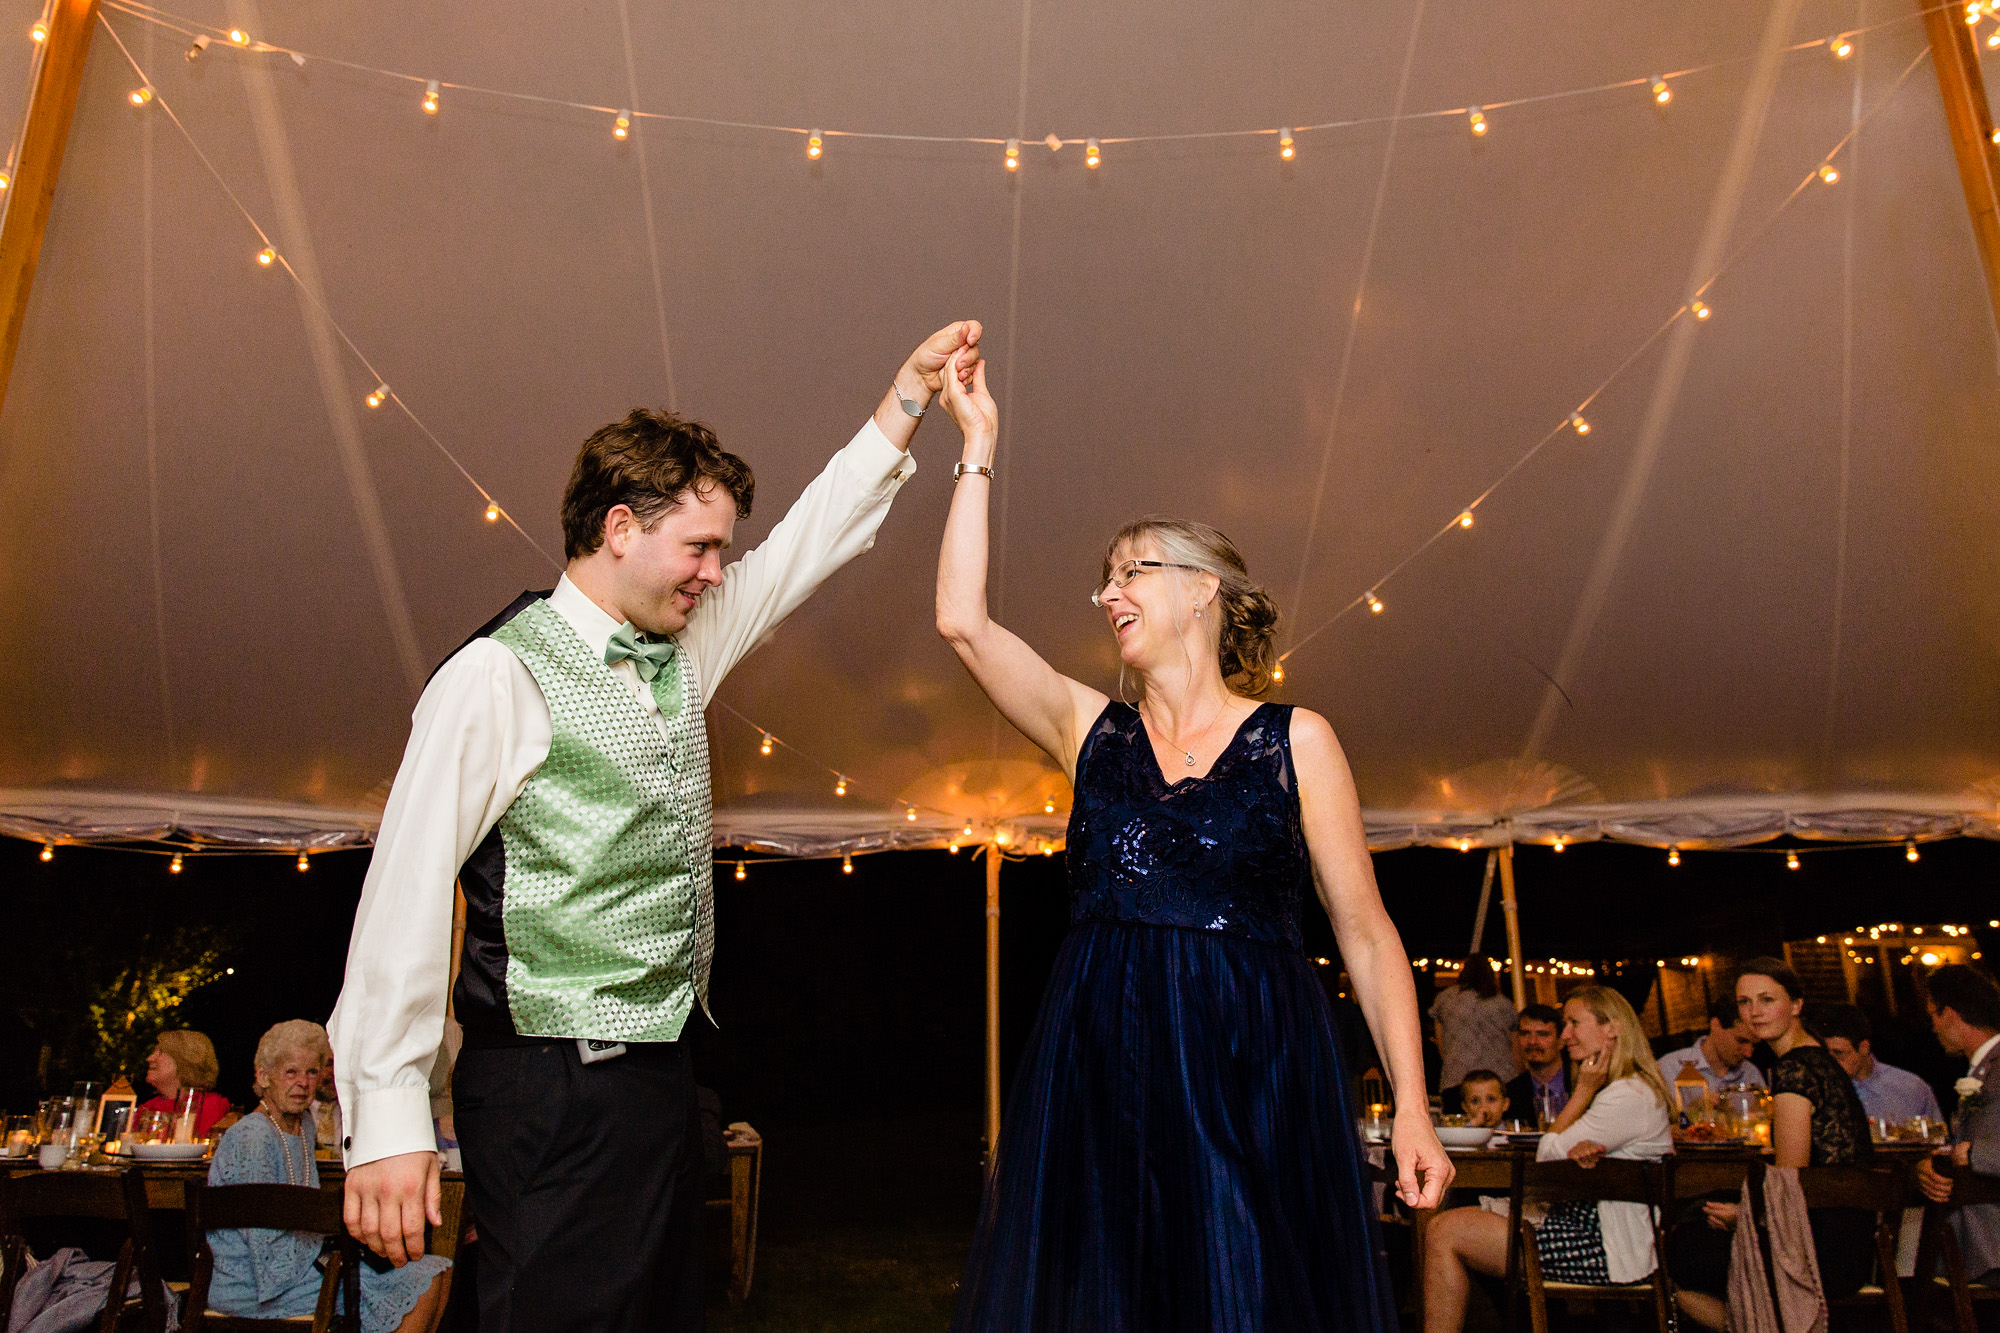 A mother and son dance at a wedding in New Harbor, Maine